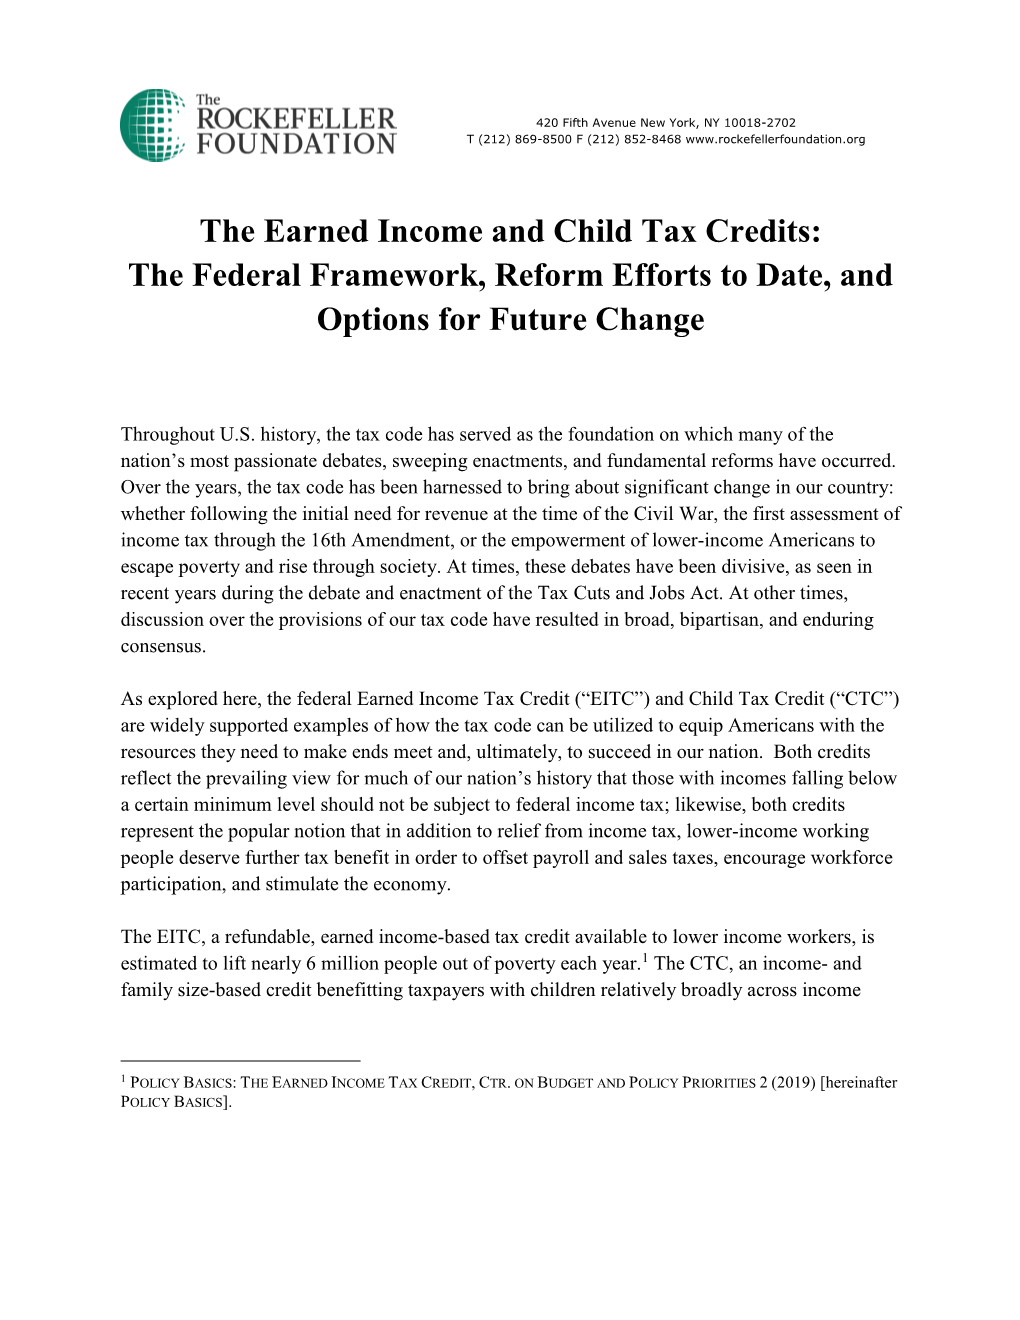 The Earned Income and Child Tax Credits: the Federal Framework, Reform Efforts to Date, and Options for Future Change